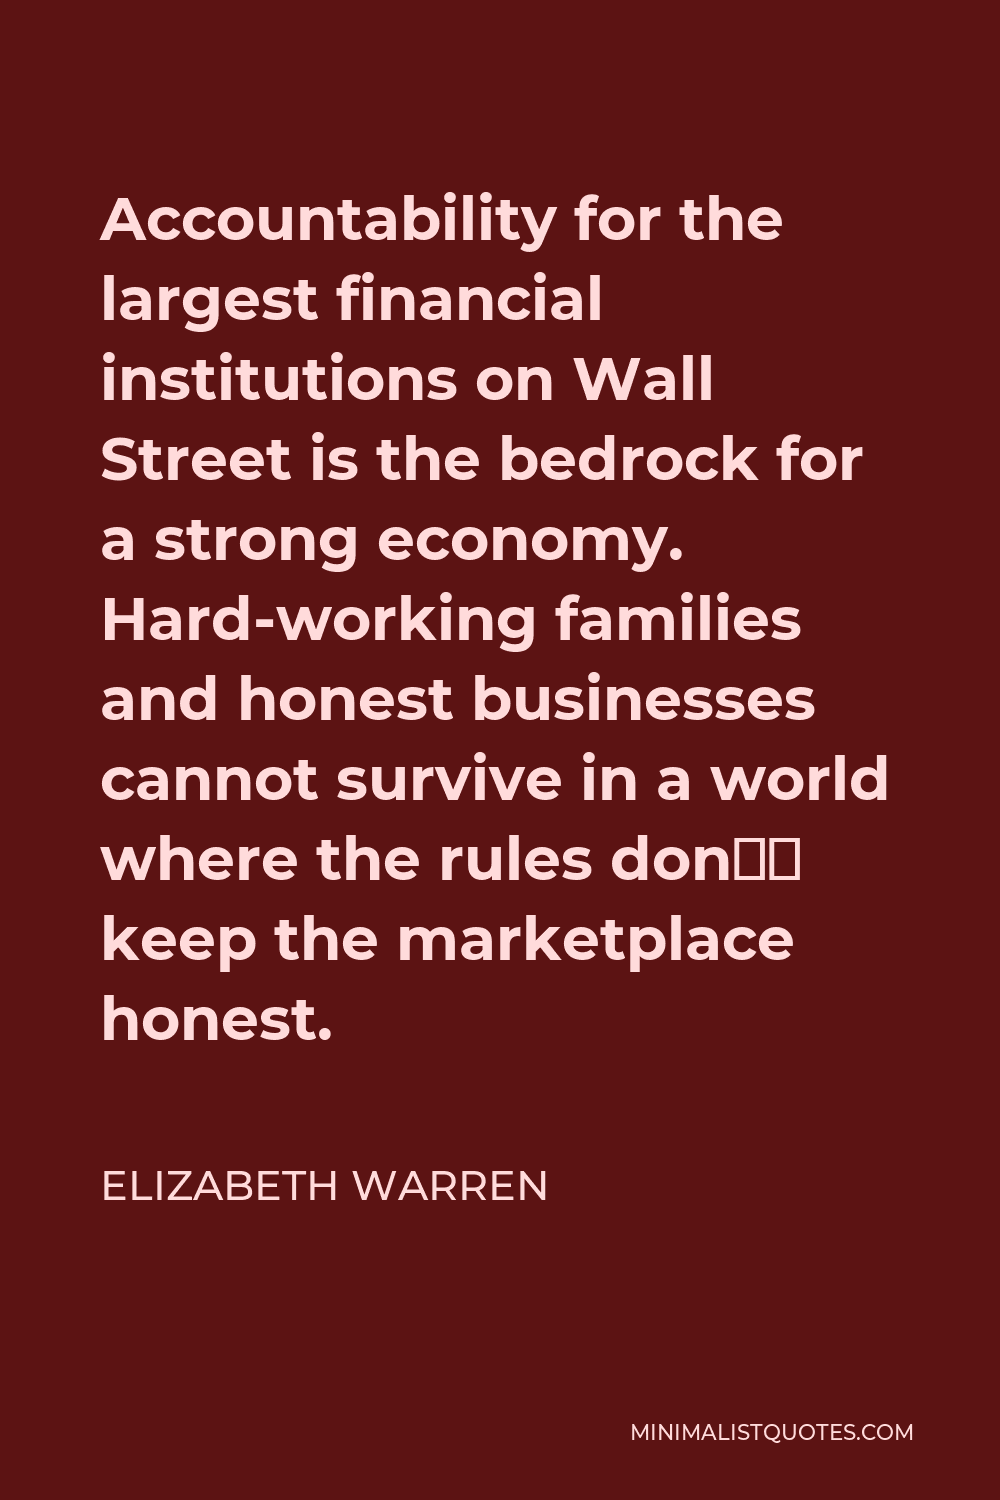 Elizabeth Warren Quote - Accountability for the largest financial institutions on Wall Street is the bedrock for a strong economy. Hard-working families and honest businesses cannot survive in a world where the rules don’t keep the marketplace honest.